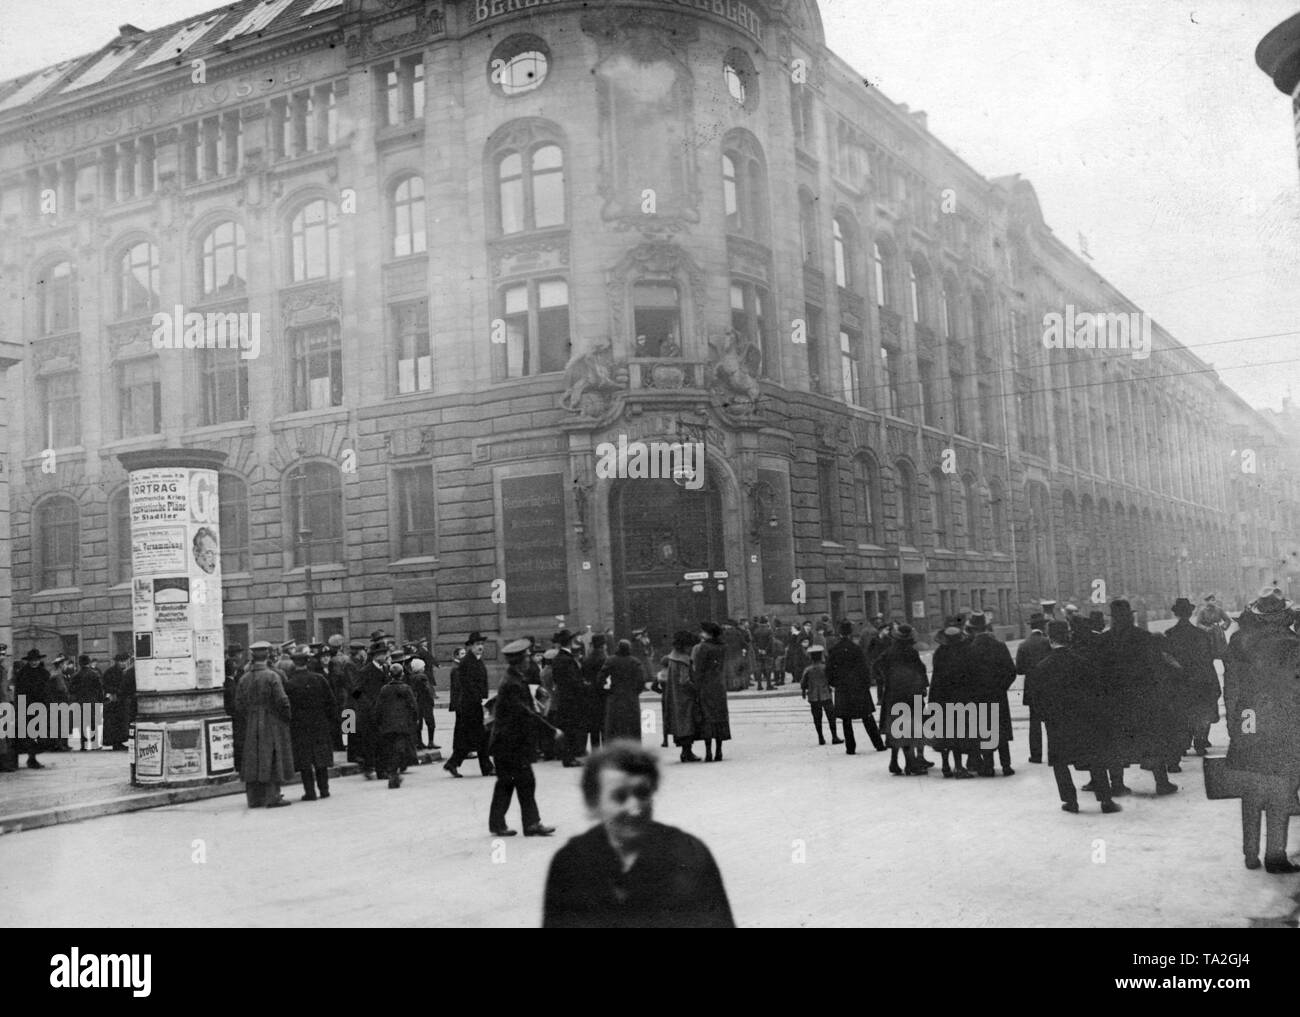 The Mossehaus at the corner of Jerusalemerstrasse / Schuetzenstrasse after its occupation by revolutionary troops. In front of the building passers-by watch the events. During the January uprising, there were armed conflicts in the Berlin Zeitungsviertel (newspaper quarter) between left-wing revolutionaries and government-loyal Freikorps units. Stock Photo